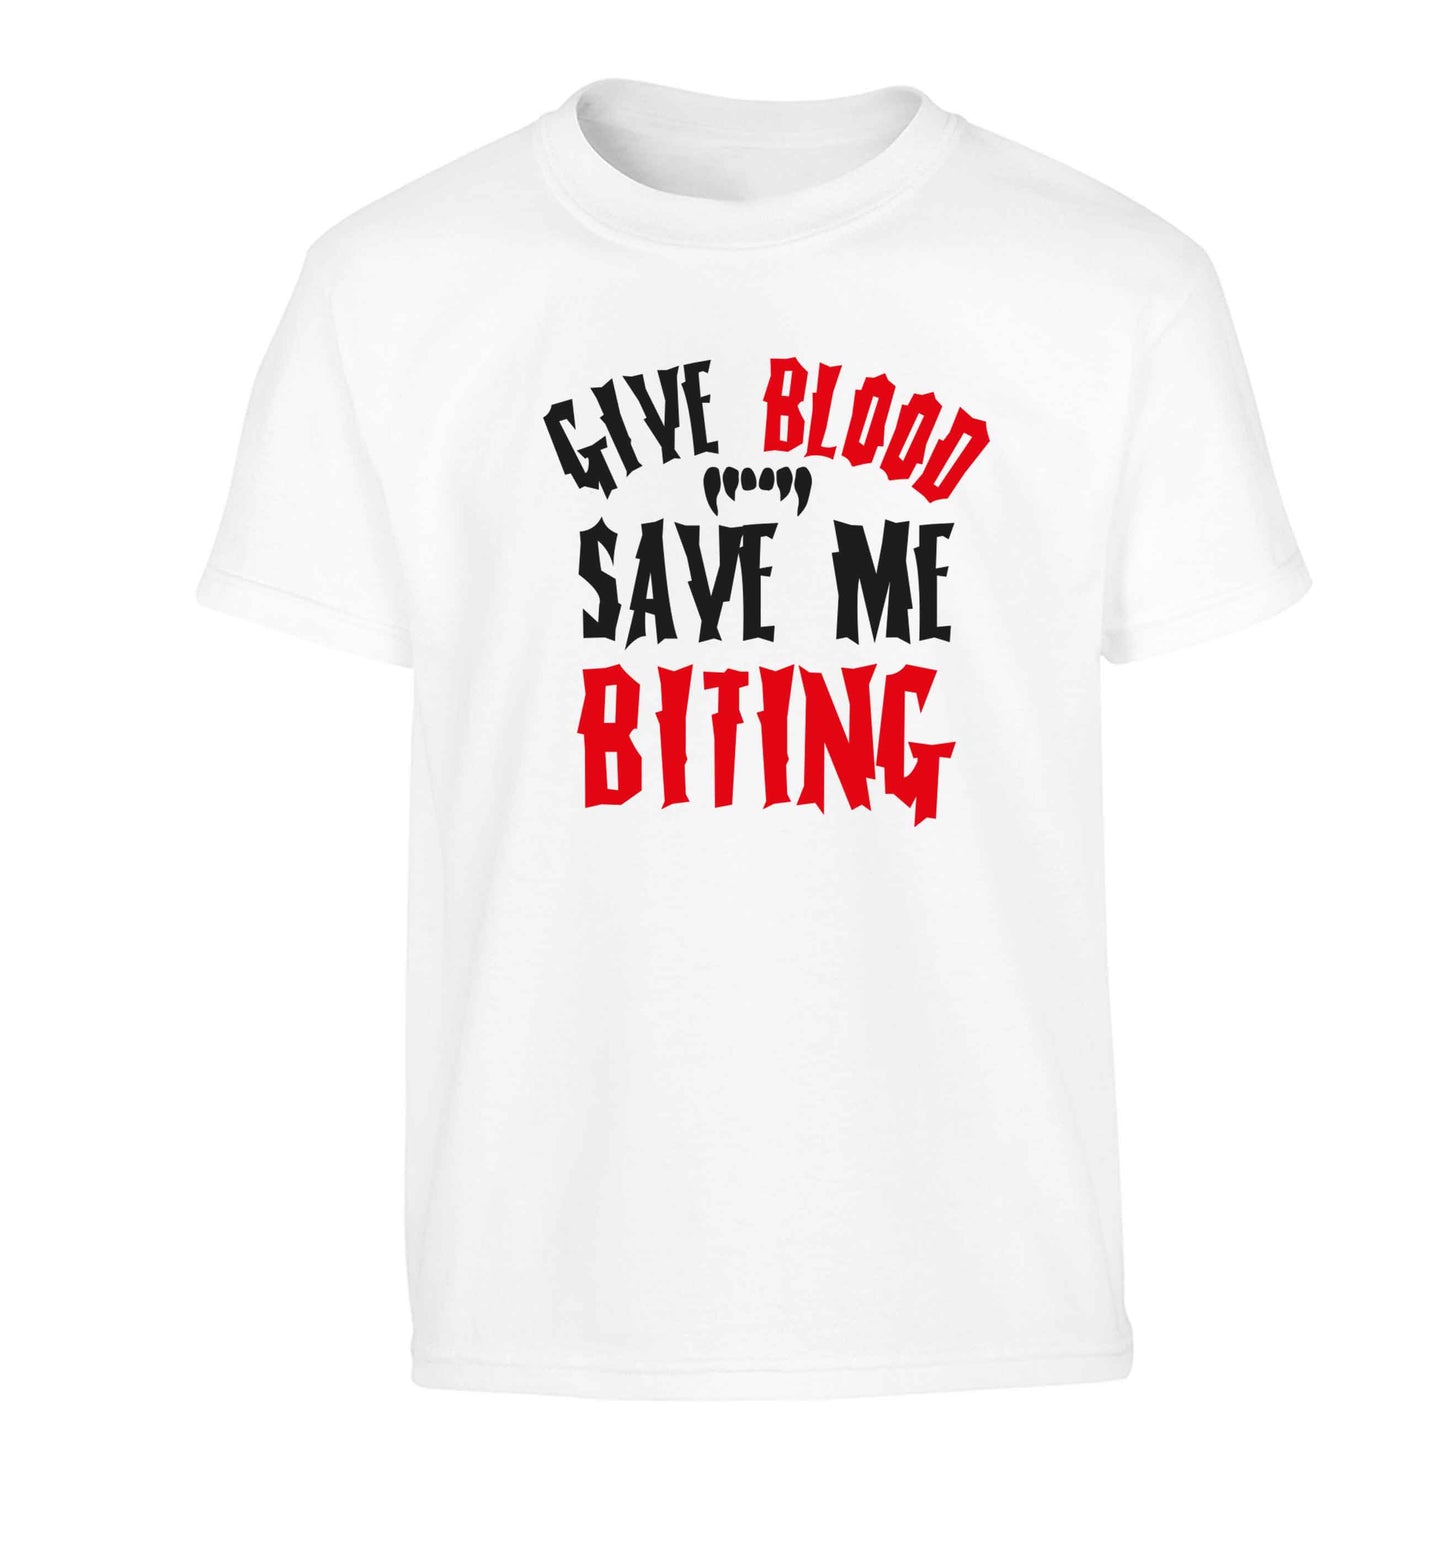 Give blood save me biting Children's white Tshirt 12-13 Years